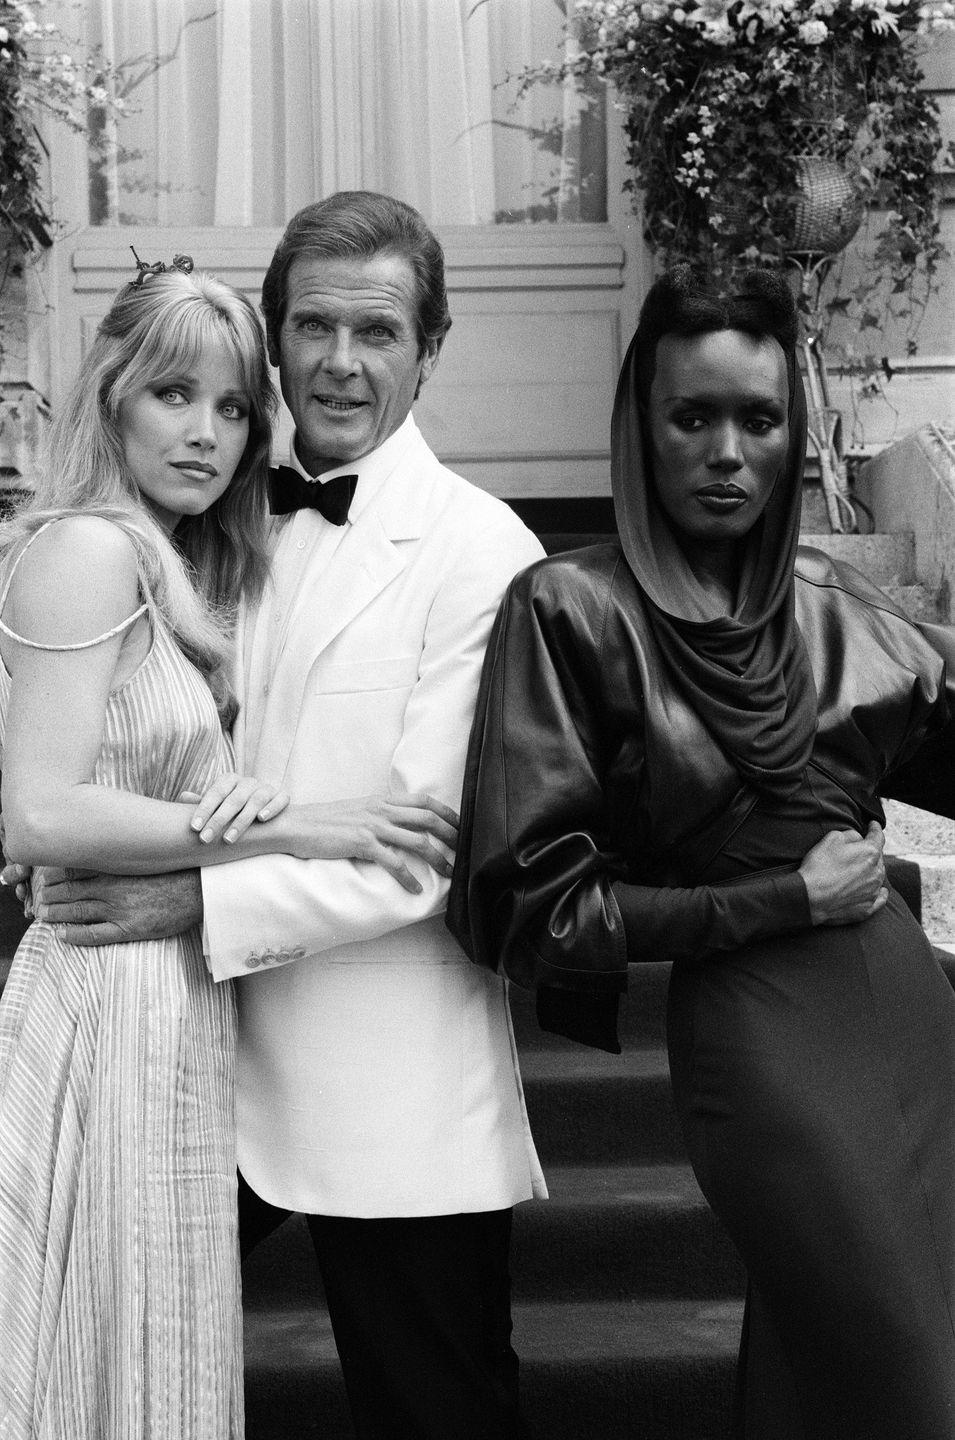 a view to a kill 1984 james bond film, photocall outside the chateau de chantilly in france, thursday 16th august 1984, tanya roberts as stacey sutton, roger moore as james bond, mi6 agent 007 and grace jones as may day photo by kent gavinmirrorpix via getty images